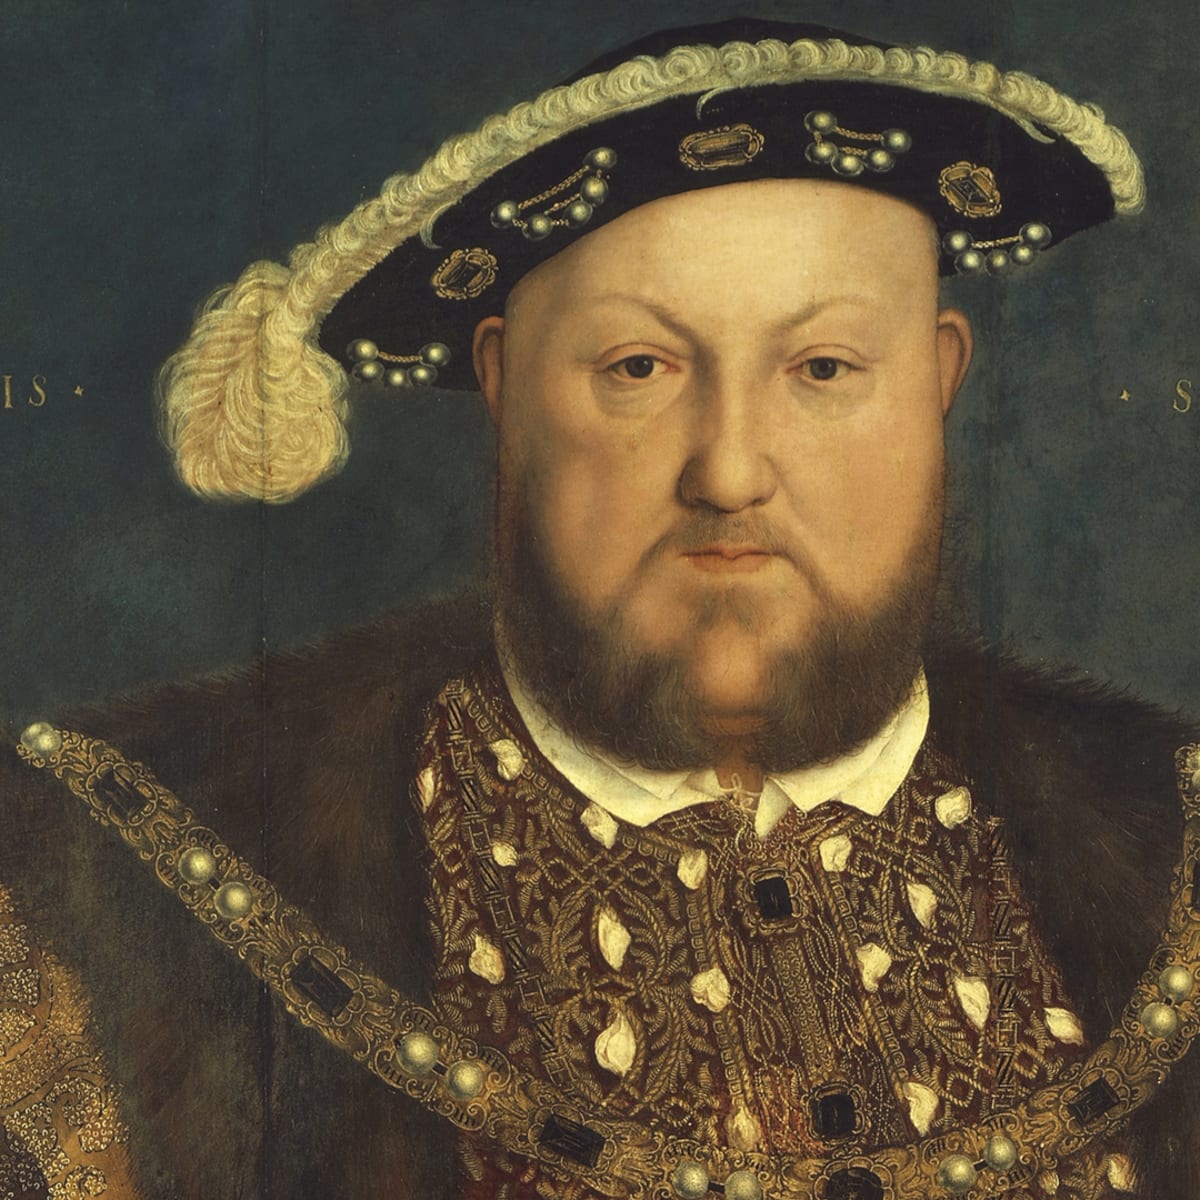 Only Extremely Legit History Buffs Can Identify These 50 Legendary People Henry VIII